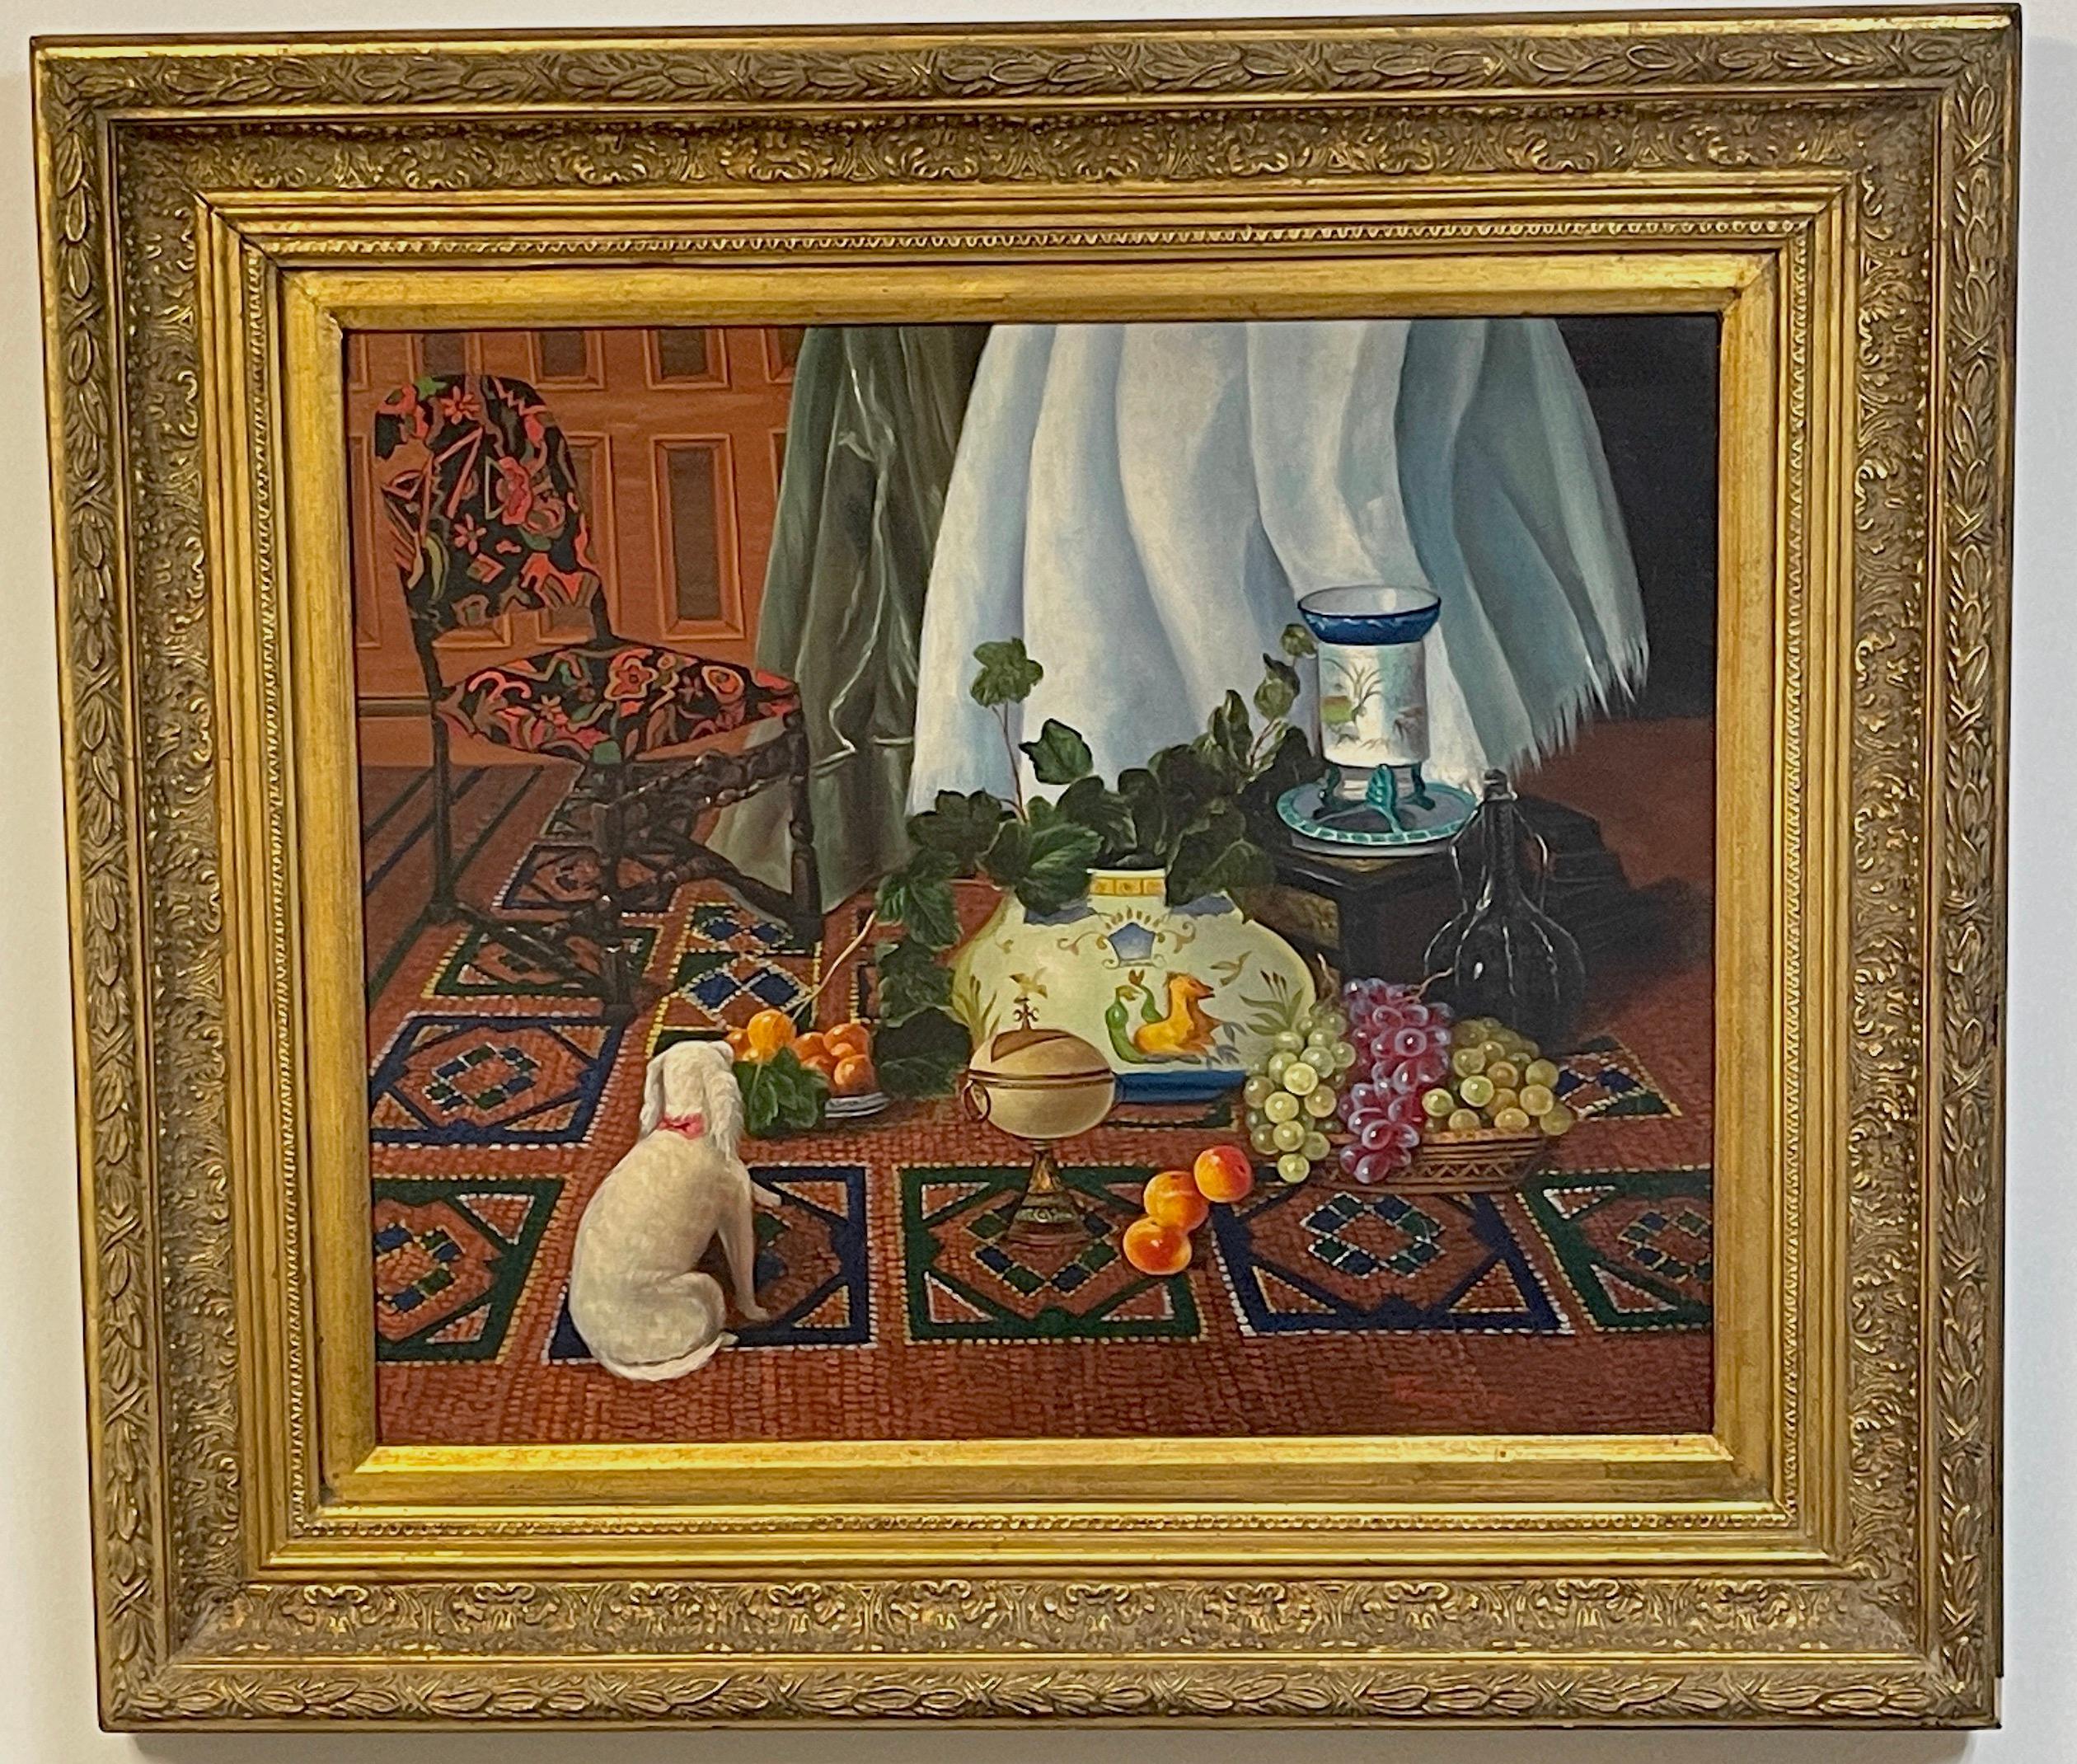 17th century style Interior Still Life, English School
A well executed 20th century work on canvas. A colorful interior still life depicting a seated white dog with raised paw resting on a geometric Persian rug, with an assortment of objets d' art,